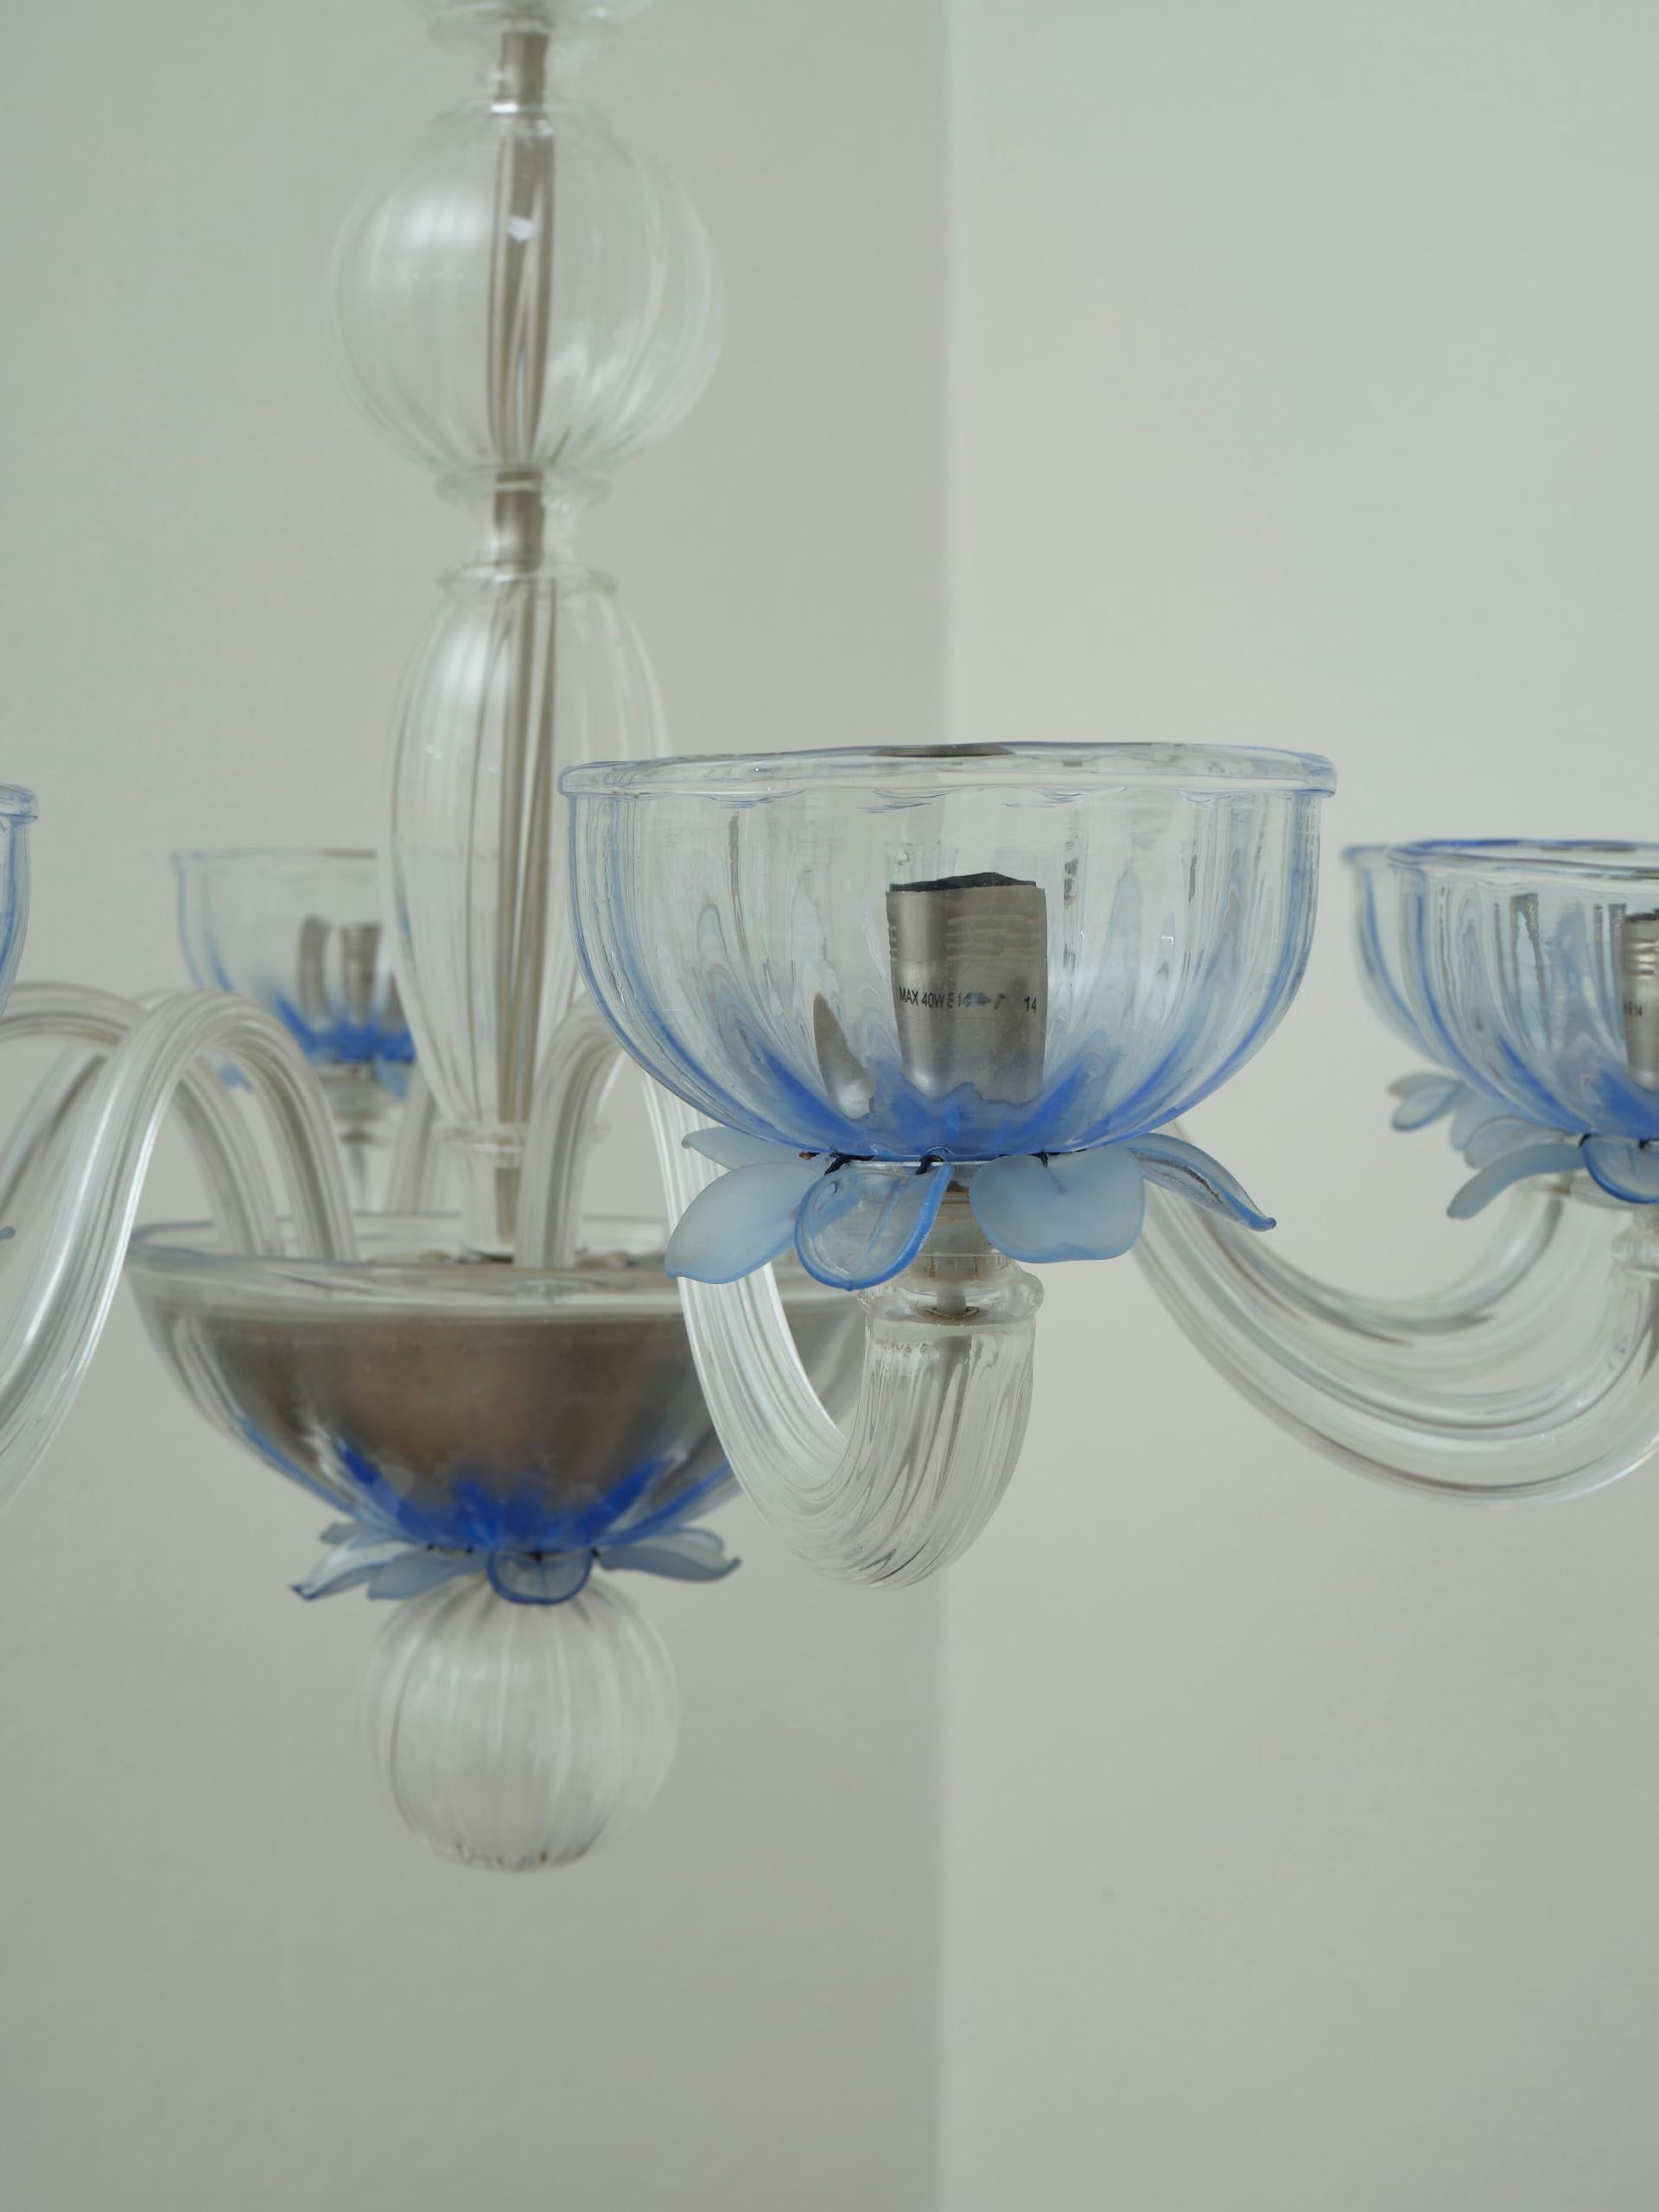 Giant European glass chandelier 8 arms blue details in the style of Murano For Sale 5